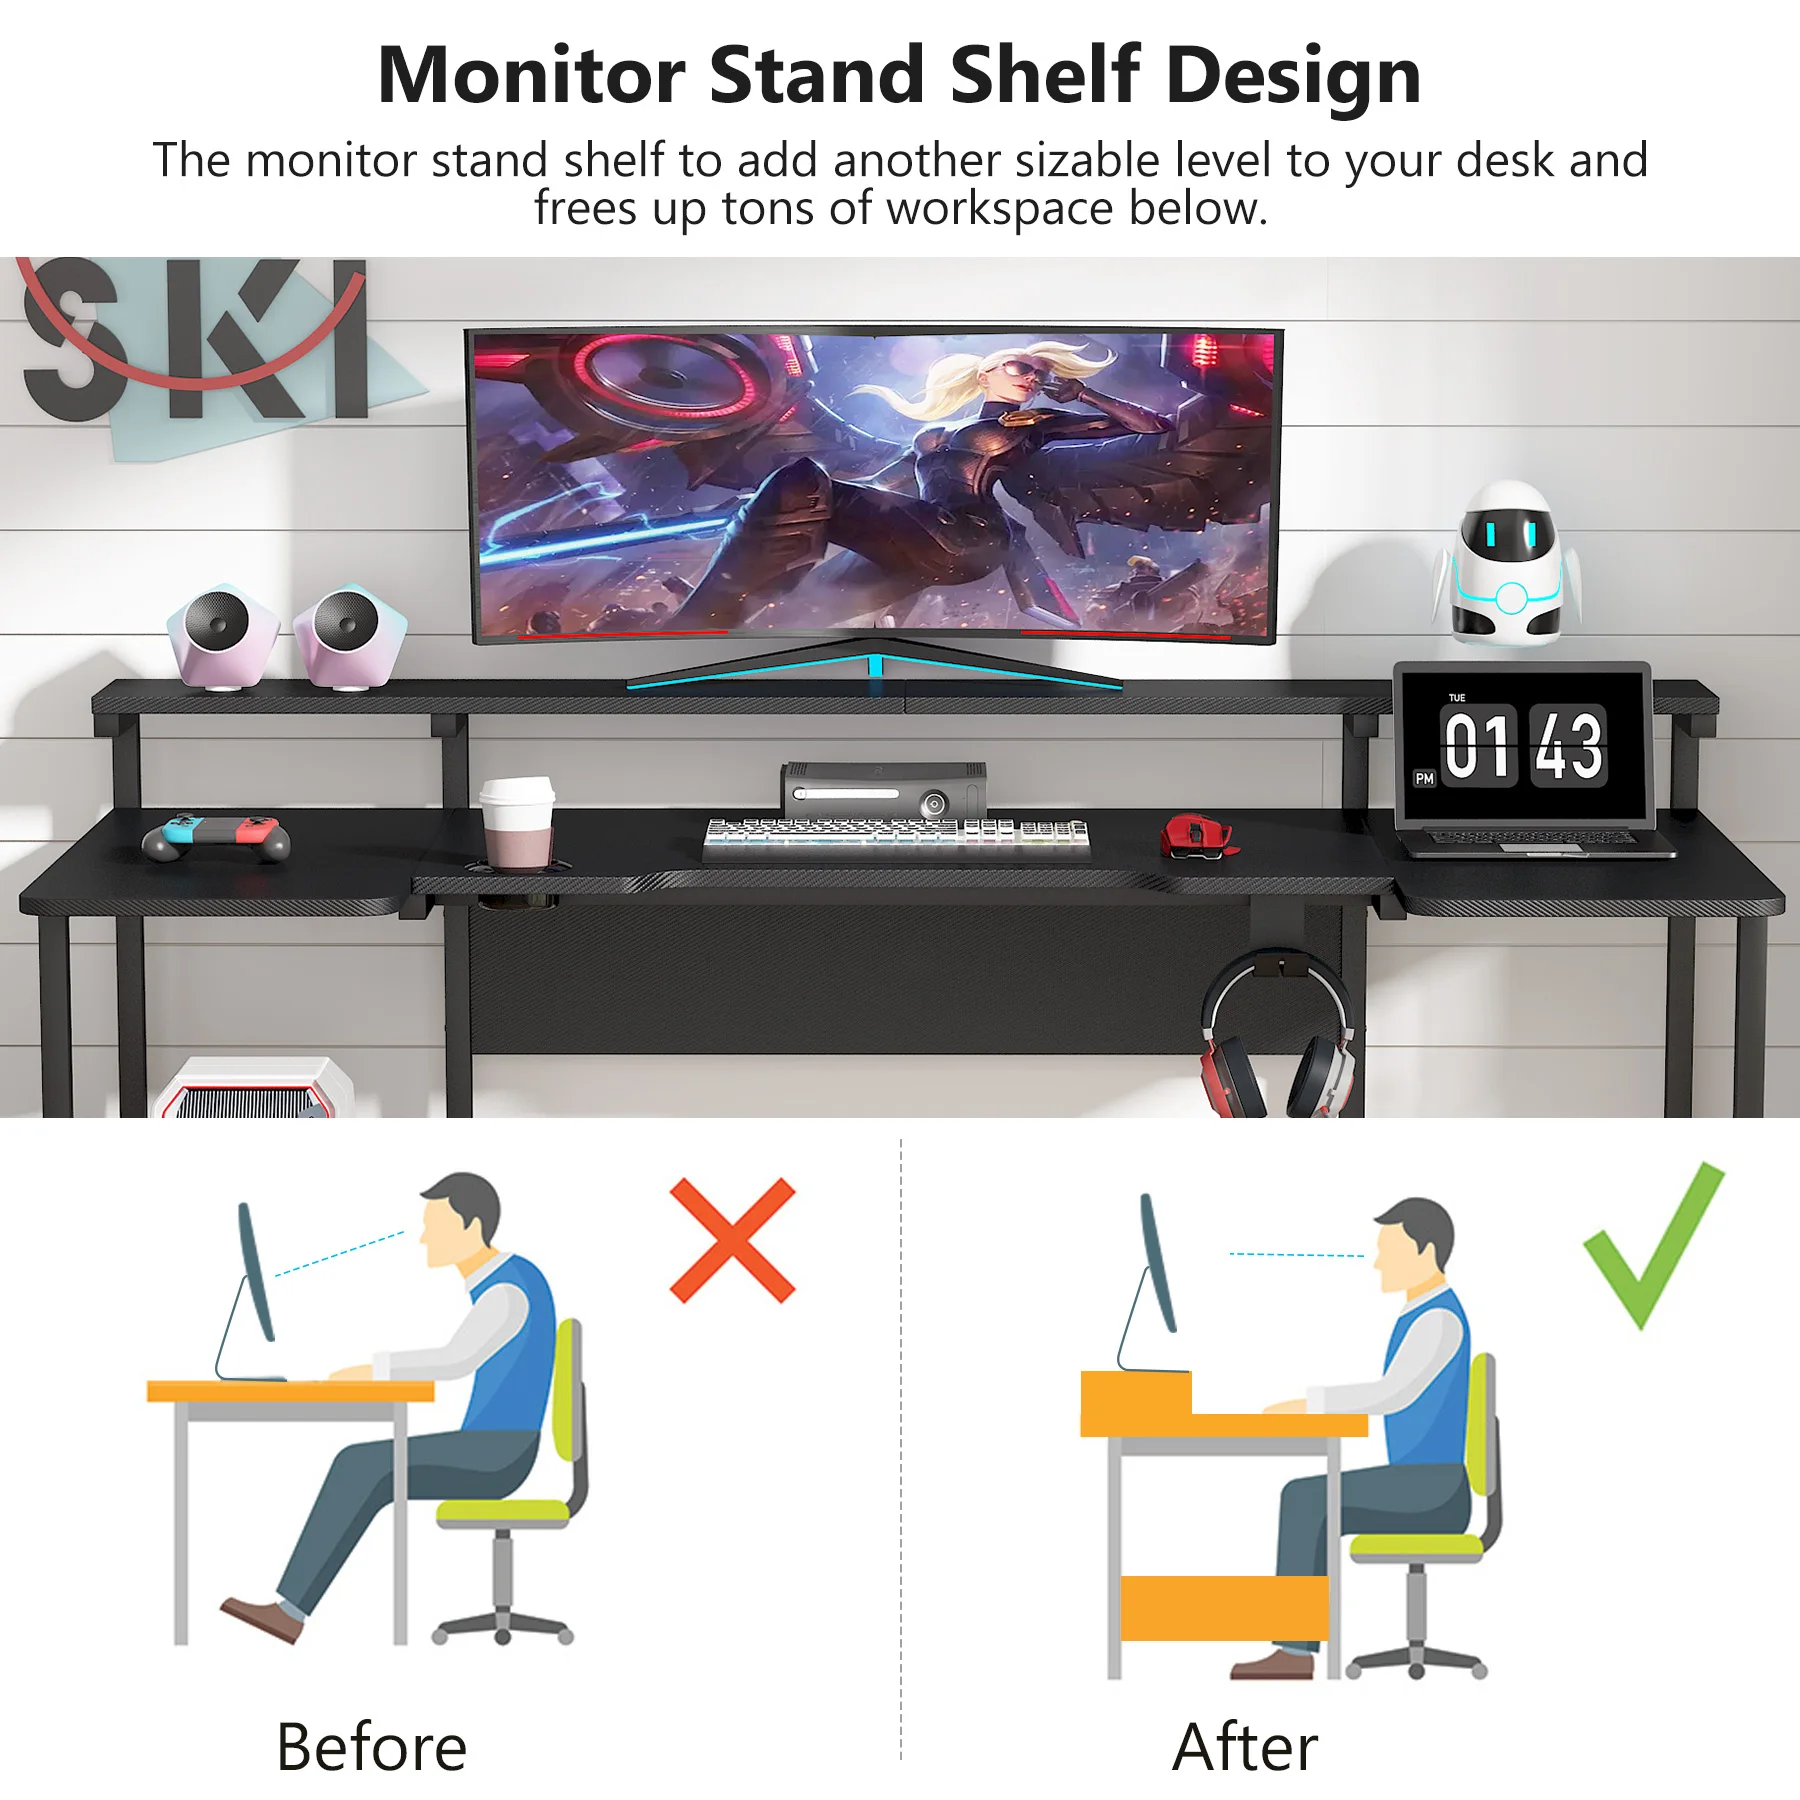 Factory Wholesale Home Office Computer desk Gaming Table Gaming Desktop Table